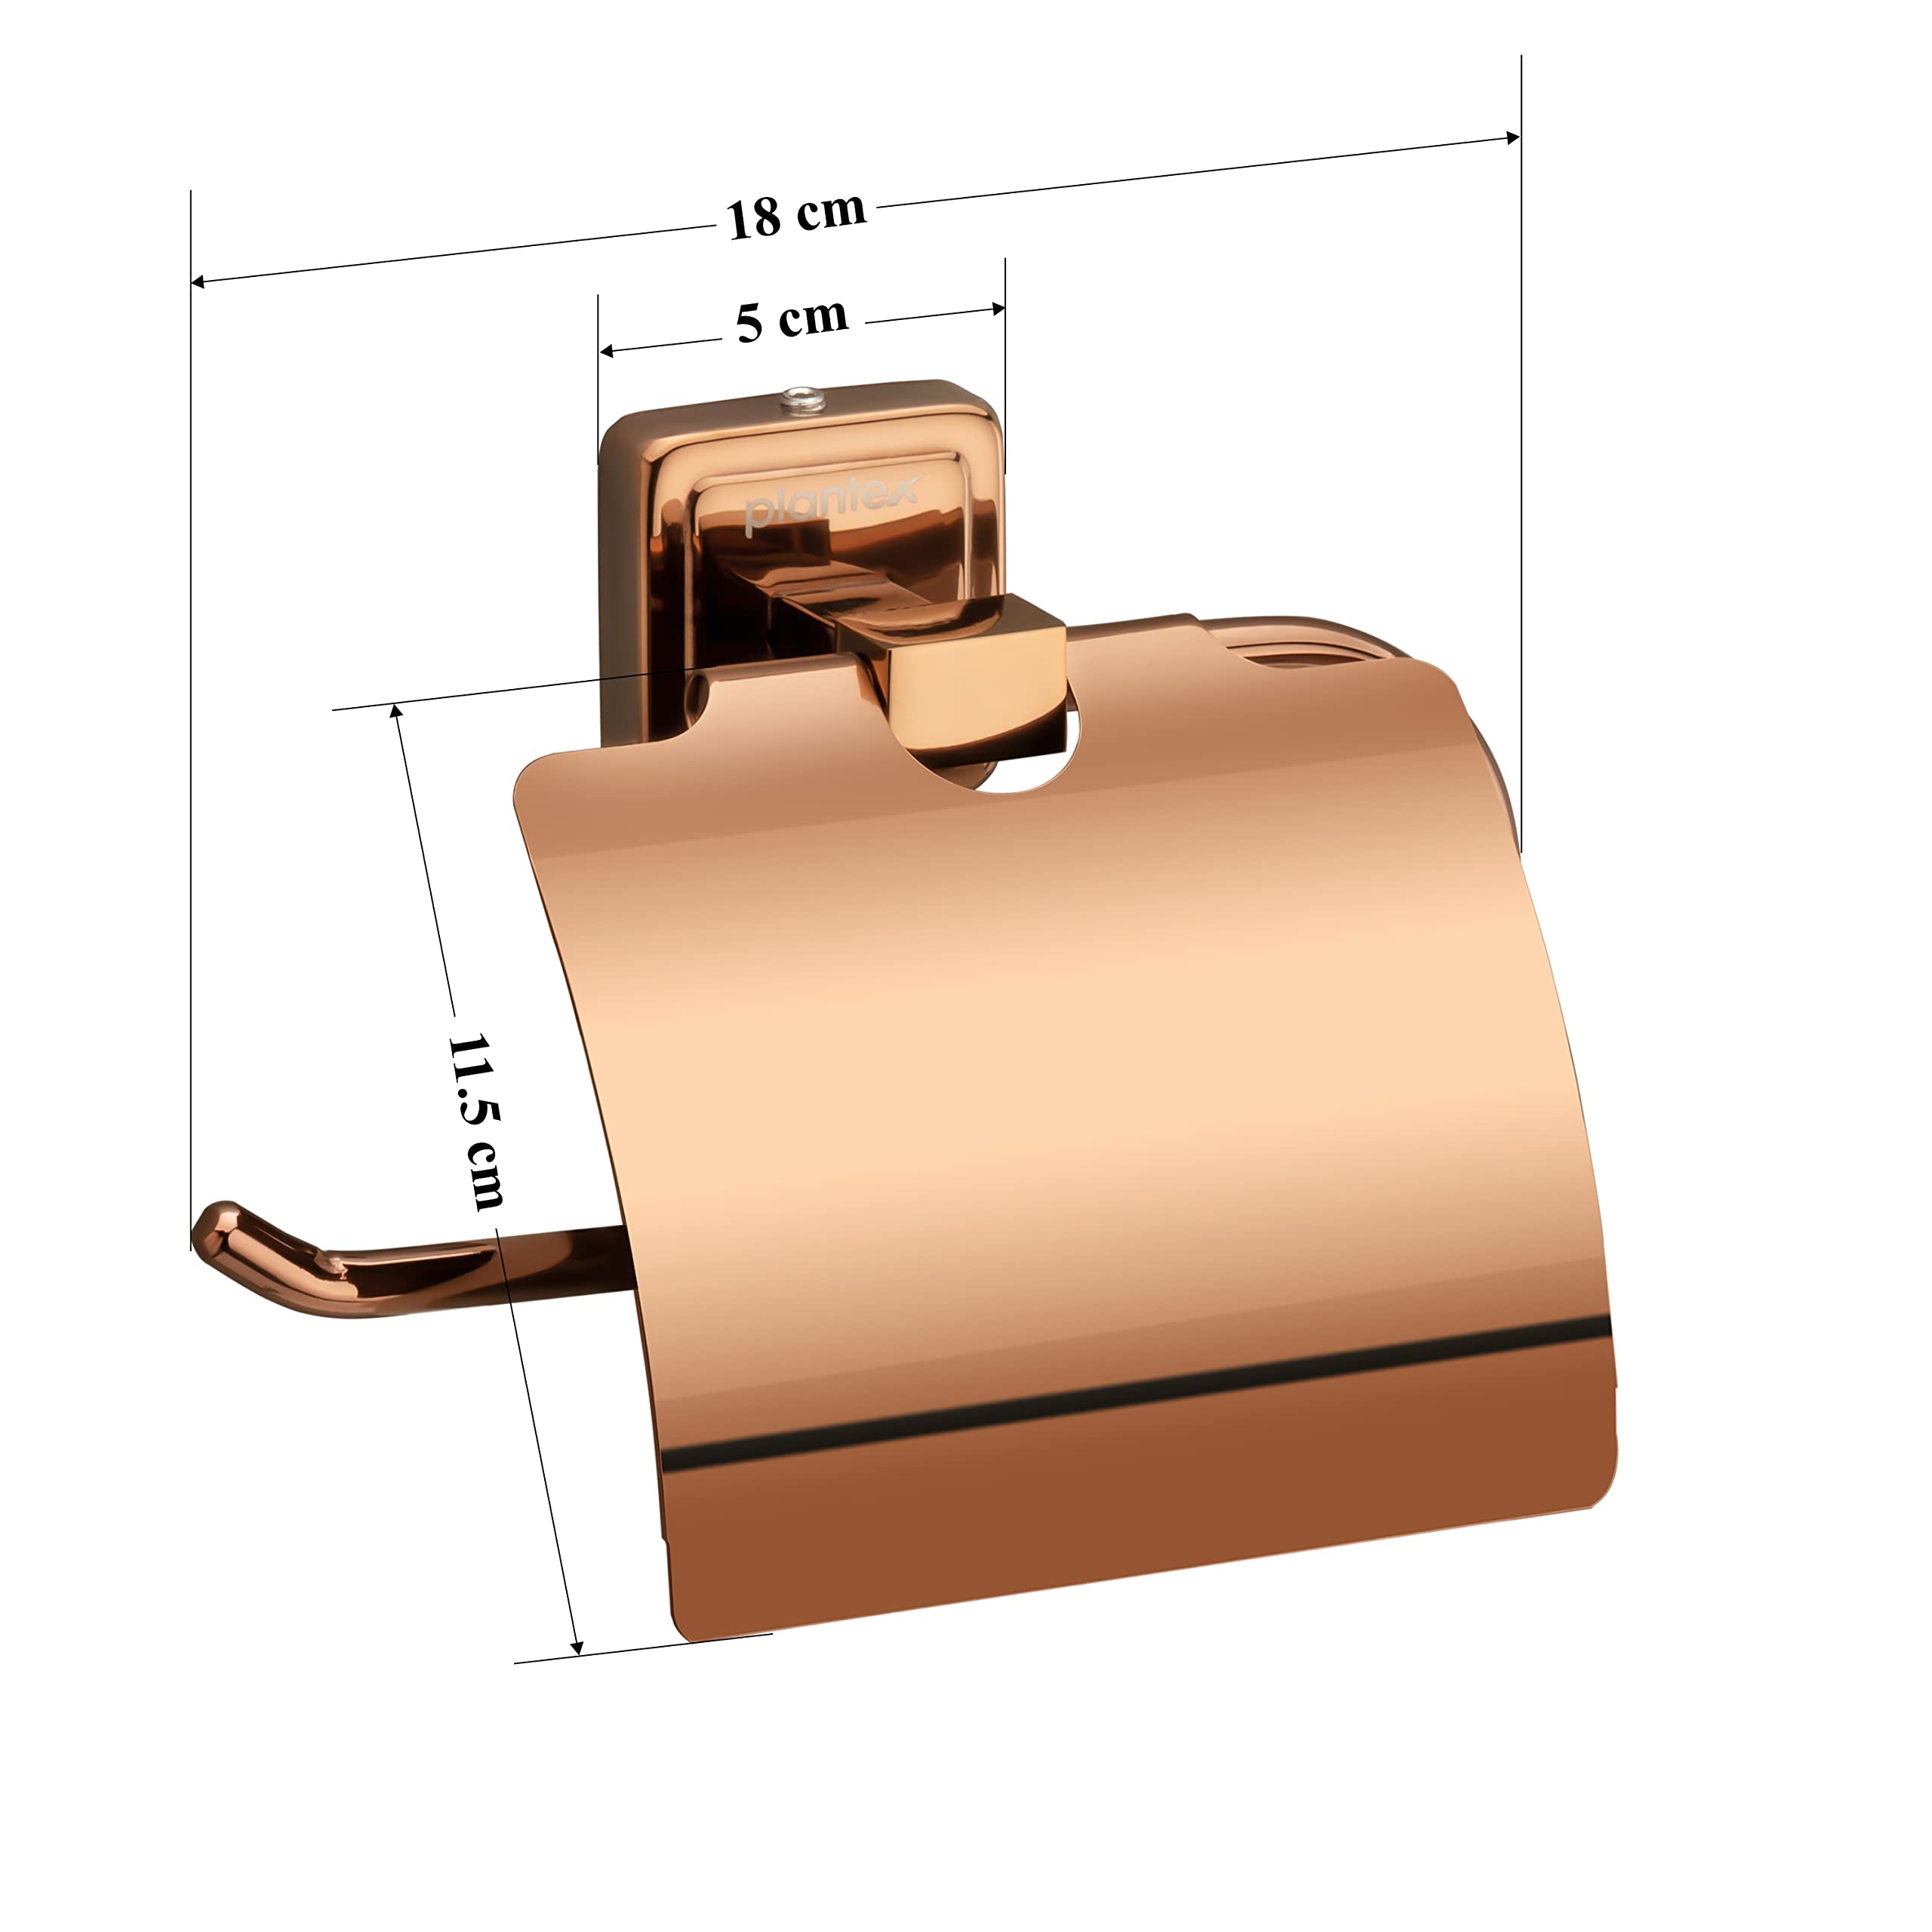 Plantex 304 Grade Stainless Steel Decan Toilet Paper Roll Holder/Tissue Paper Holder for Bathroom/Bathroom Accessories - Pack of 1 (648 - PVD Rose Gold)